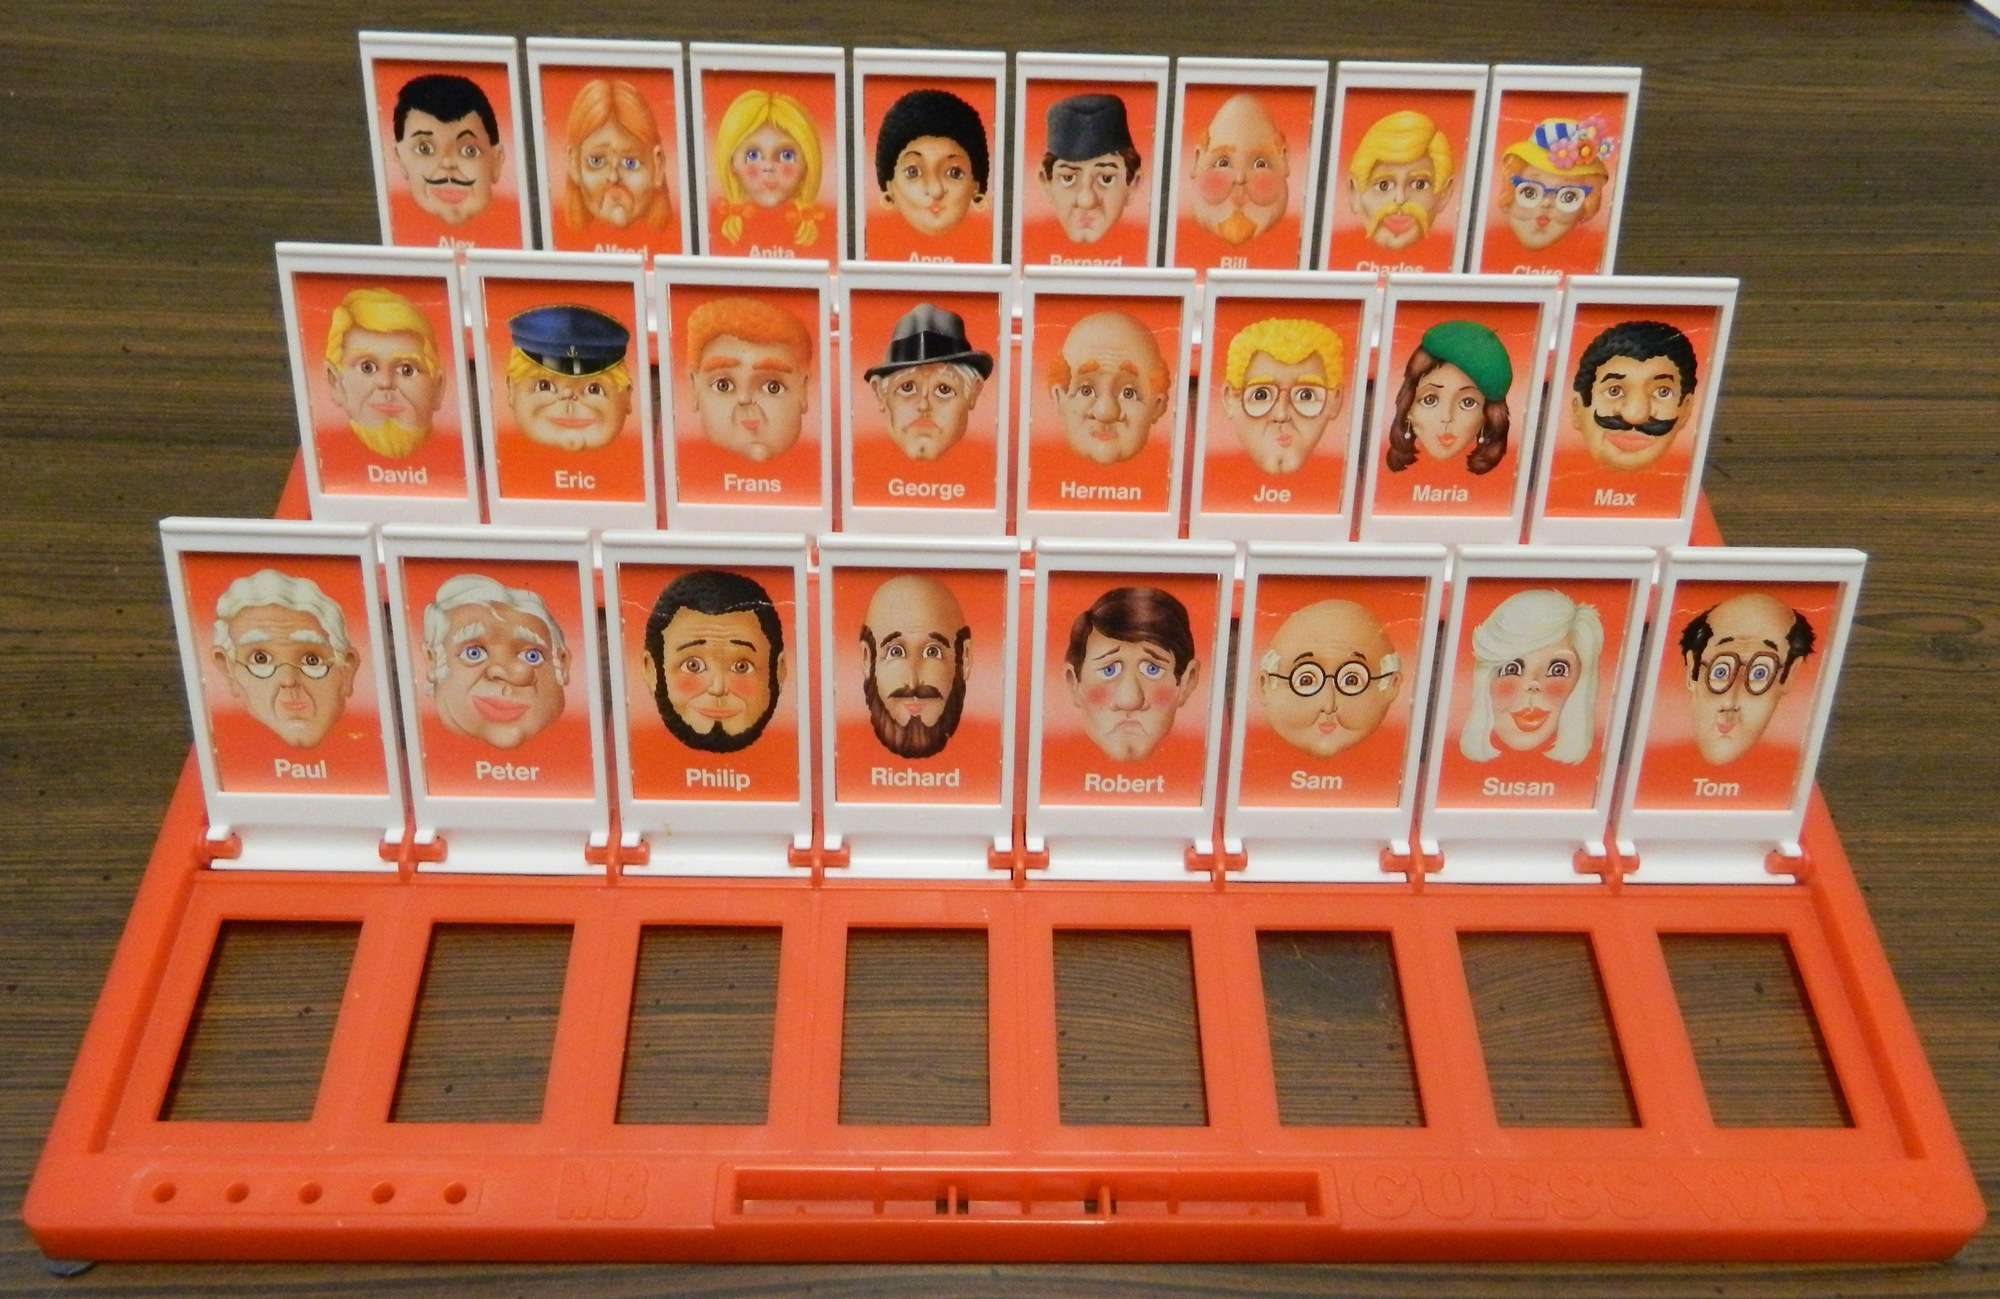 How to Win Guess Who Within Six Turns Geeky